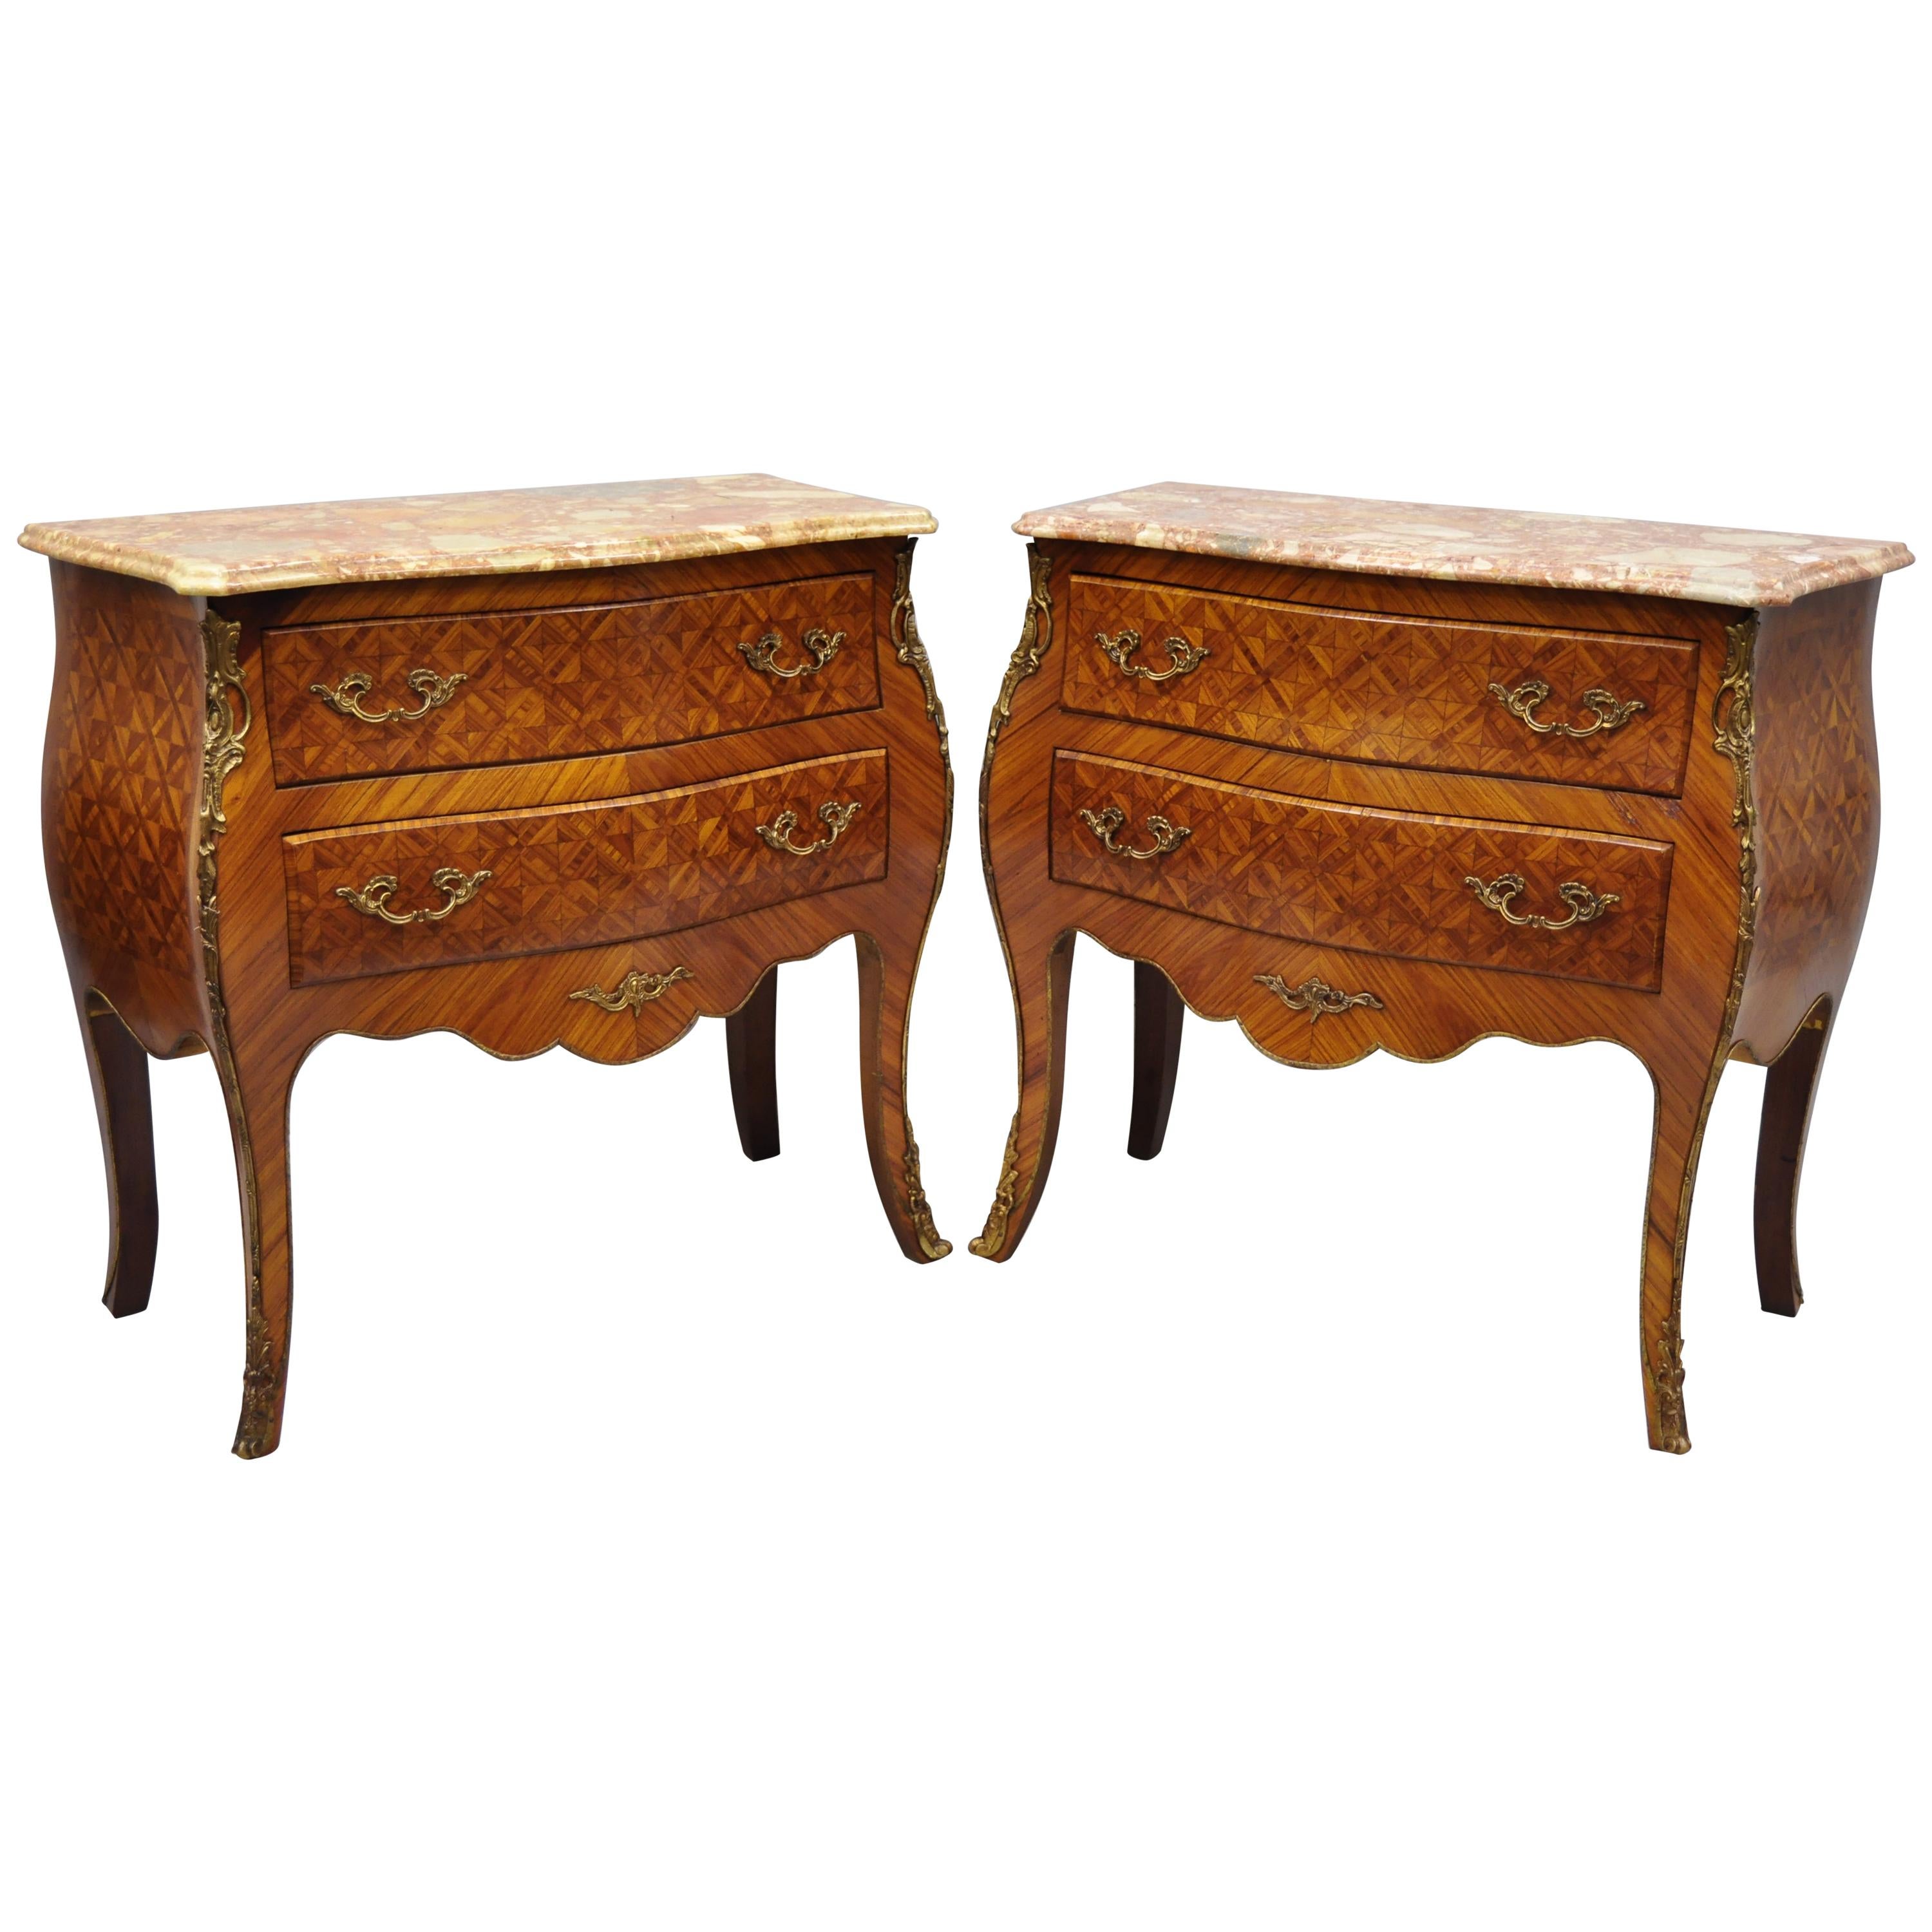 Pair of French Louis XV Style Pink Marble-Top Inlaid Bombe Commode Chests